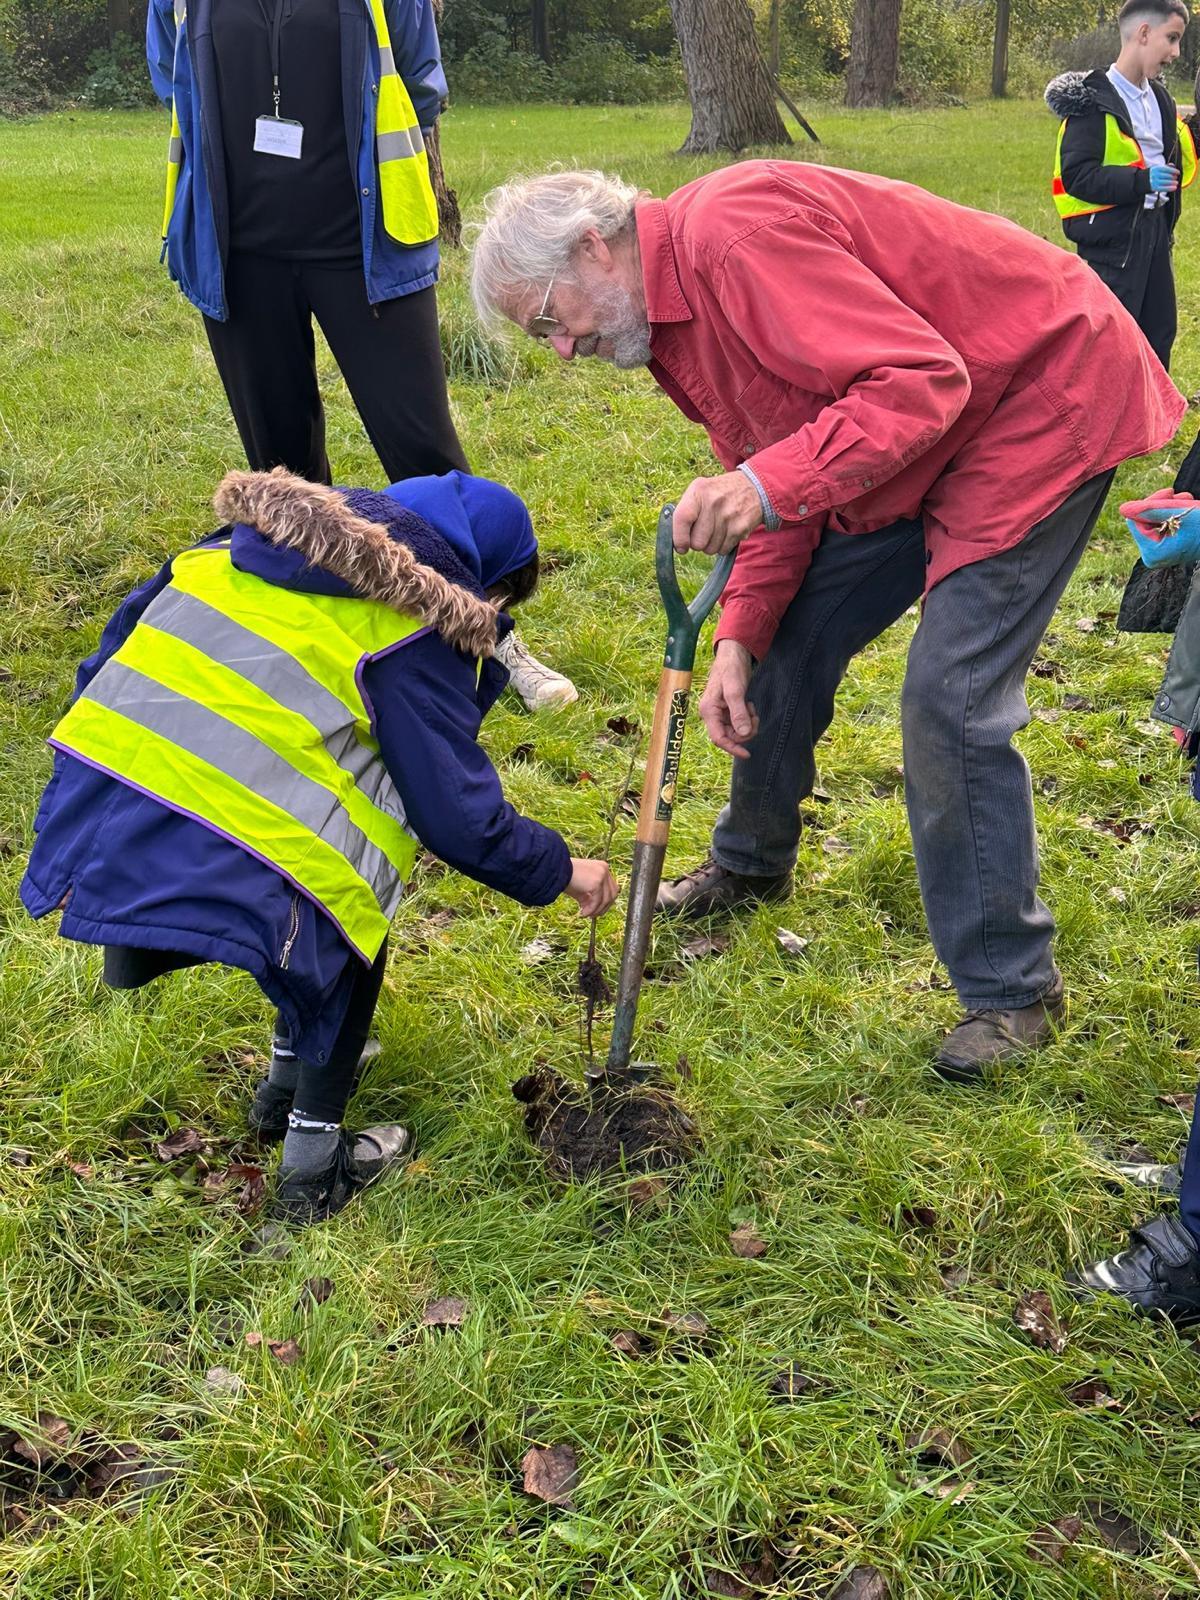 Year 4 from St Silas School planting bulbs. Picture by: Tracey Dunn